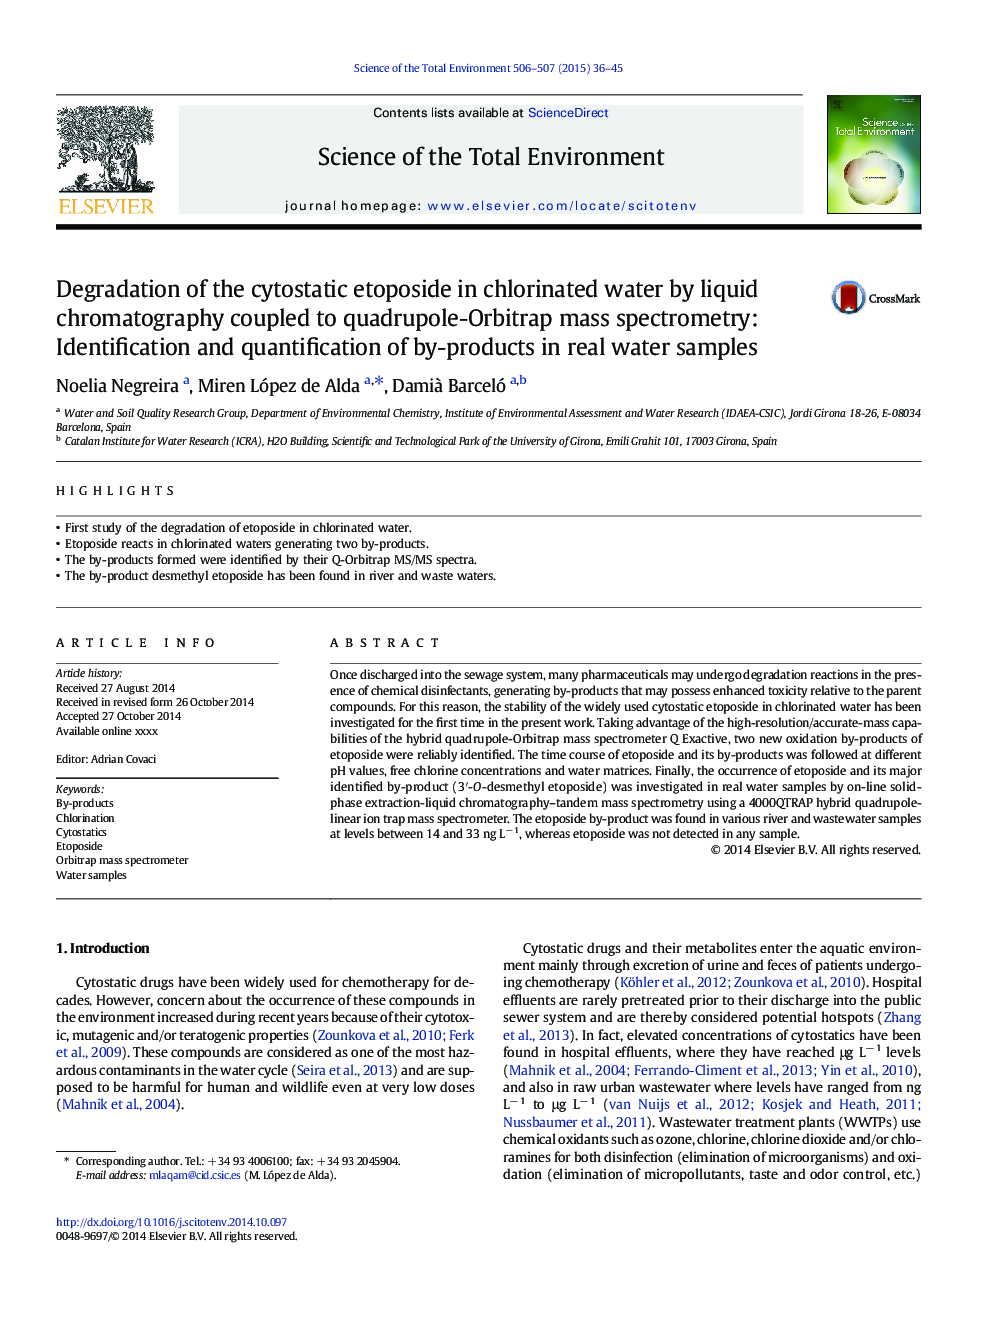 Degradation of the cytostatic etoposide in chlorinated water by liquid chromatography coupled to quadrupole-Orbitrap mass spectrometry: Identification and quantification of by-products in real water samples